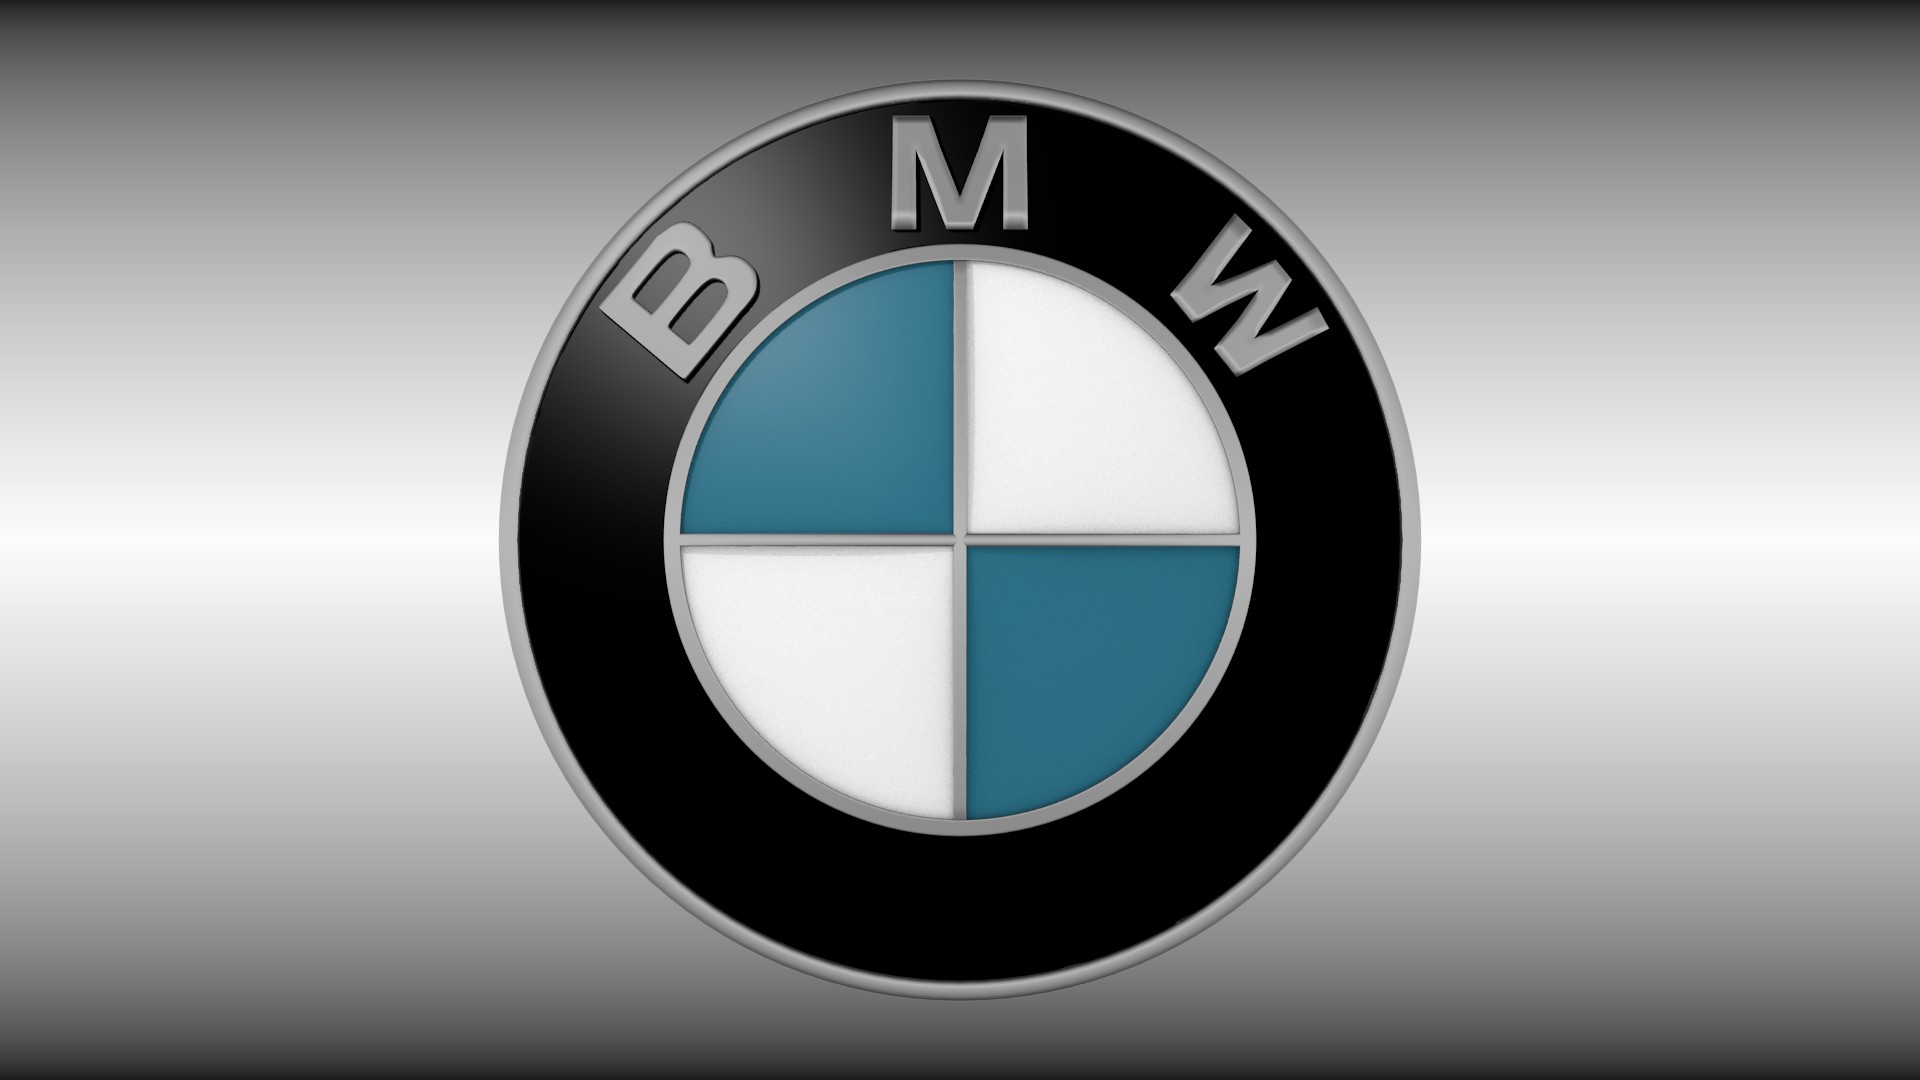 Bmw Logo On Luxury Car In Kazan Russia Photo Background And Picture For  Free Download - Pngtree